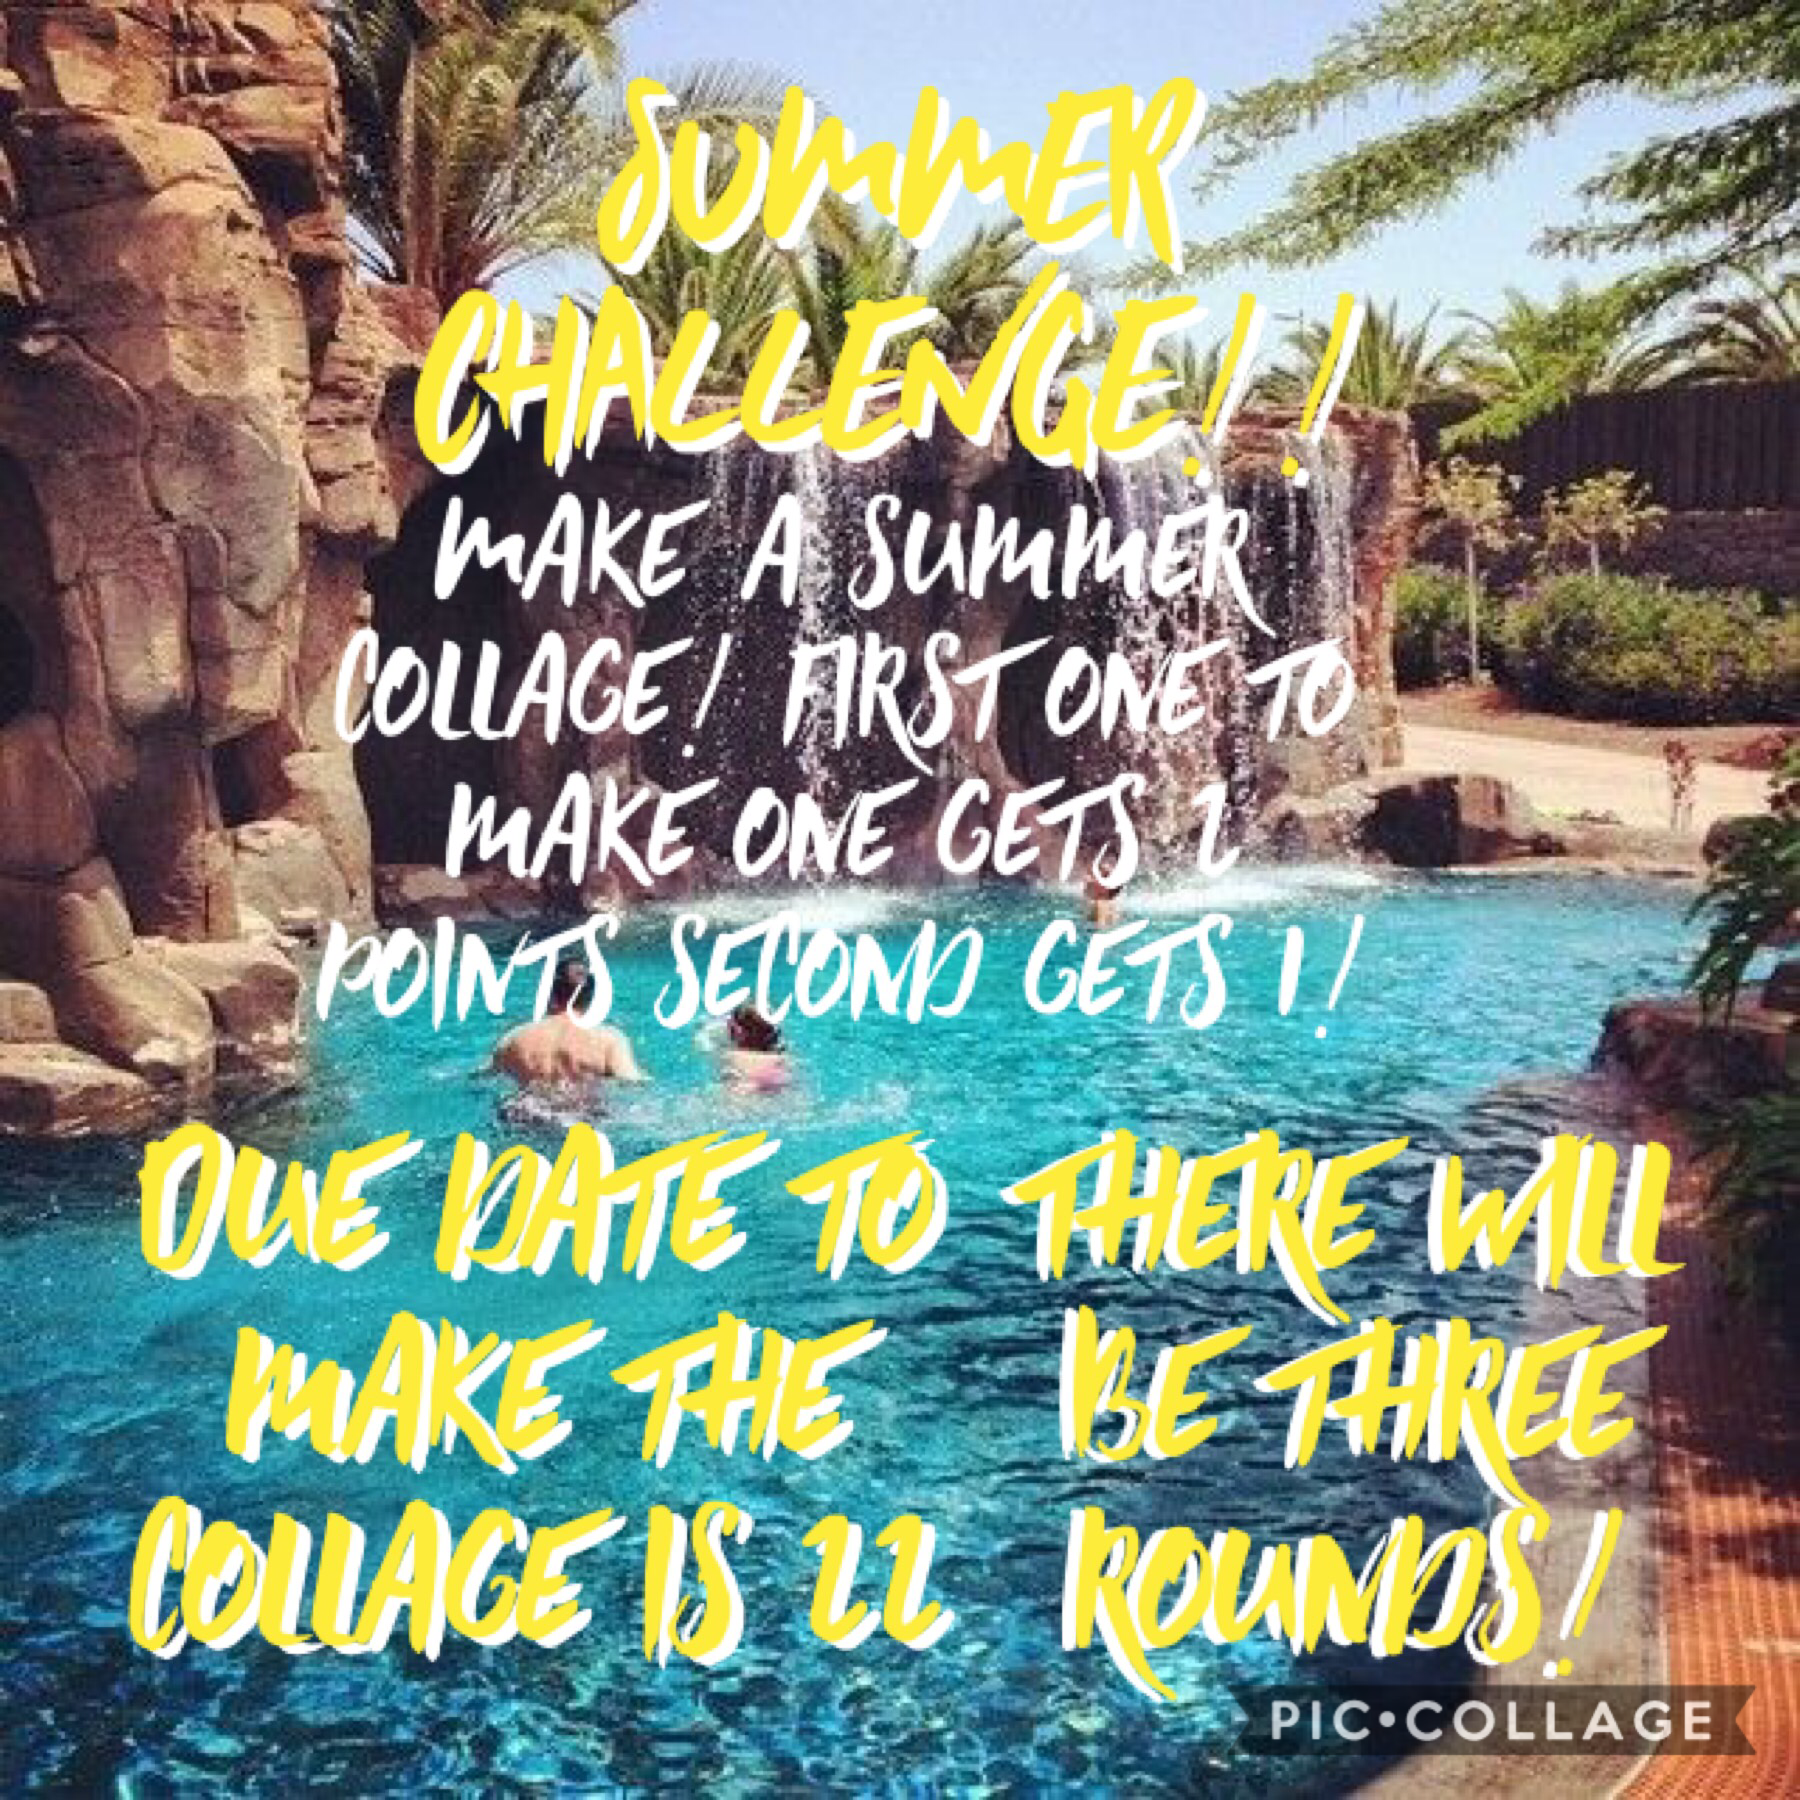 Make a summer collage! Due date is 22. There will only be 3 rounds. MAY THE BEST COLLAGE WIN!🏆